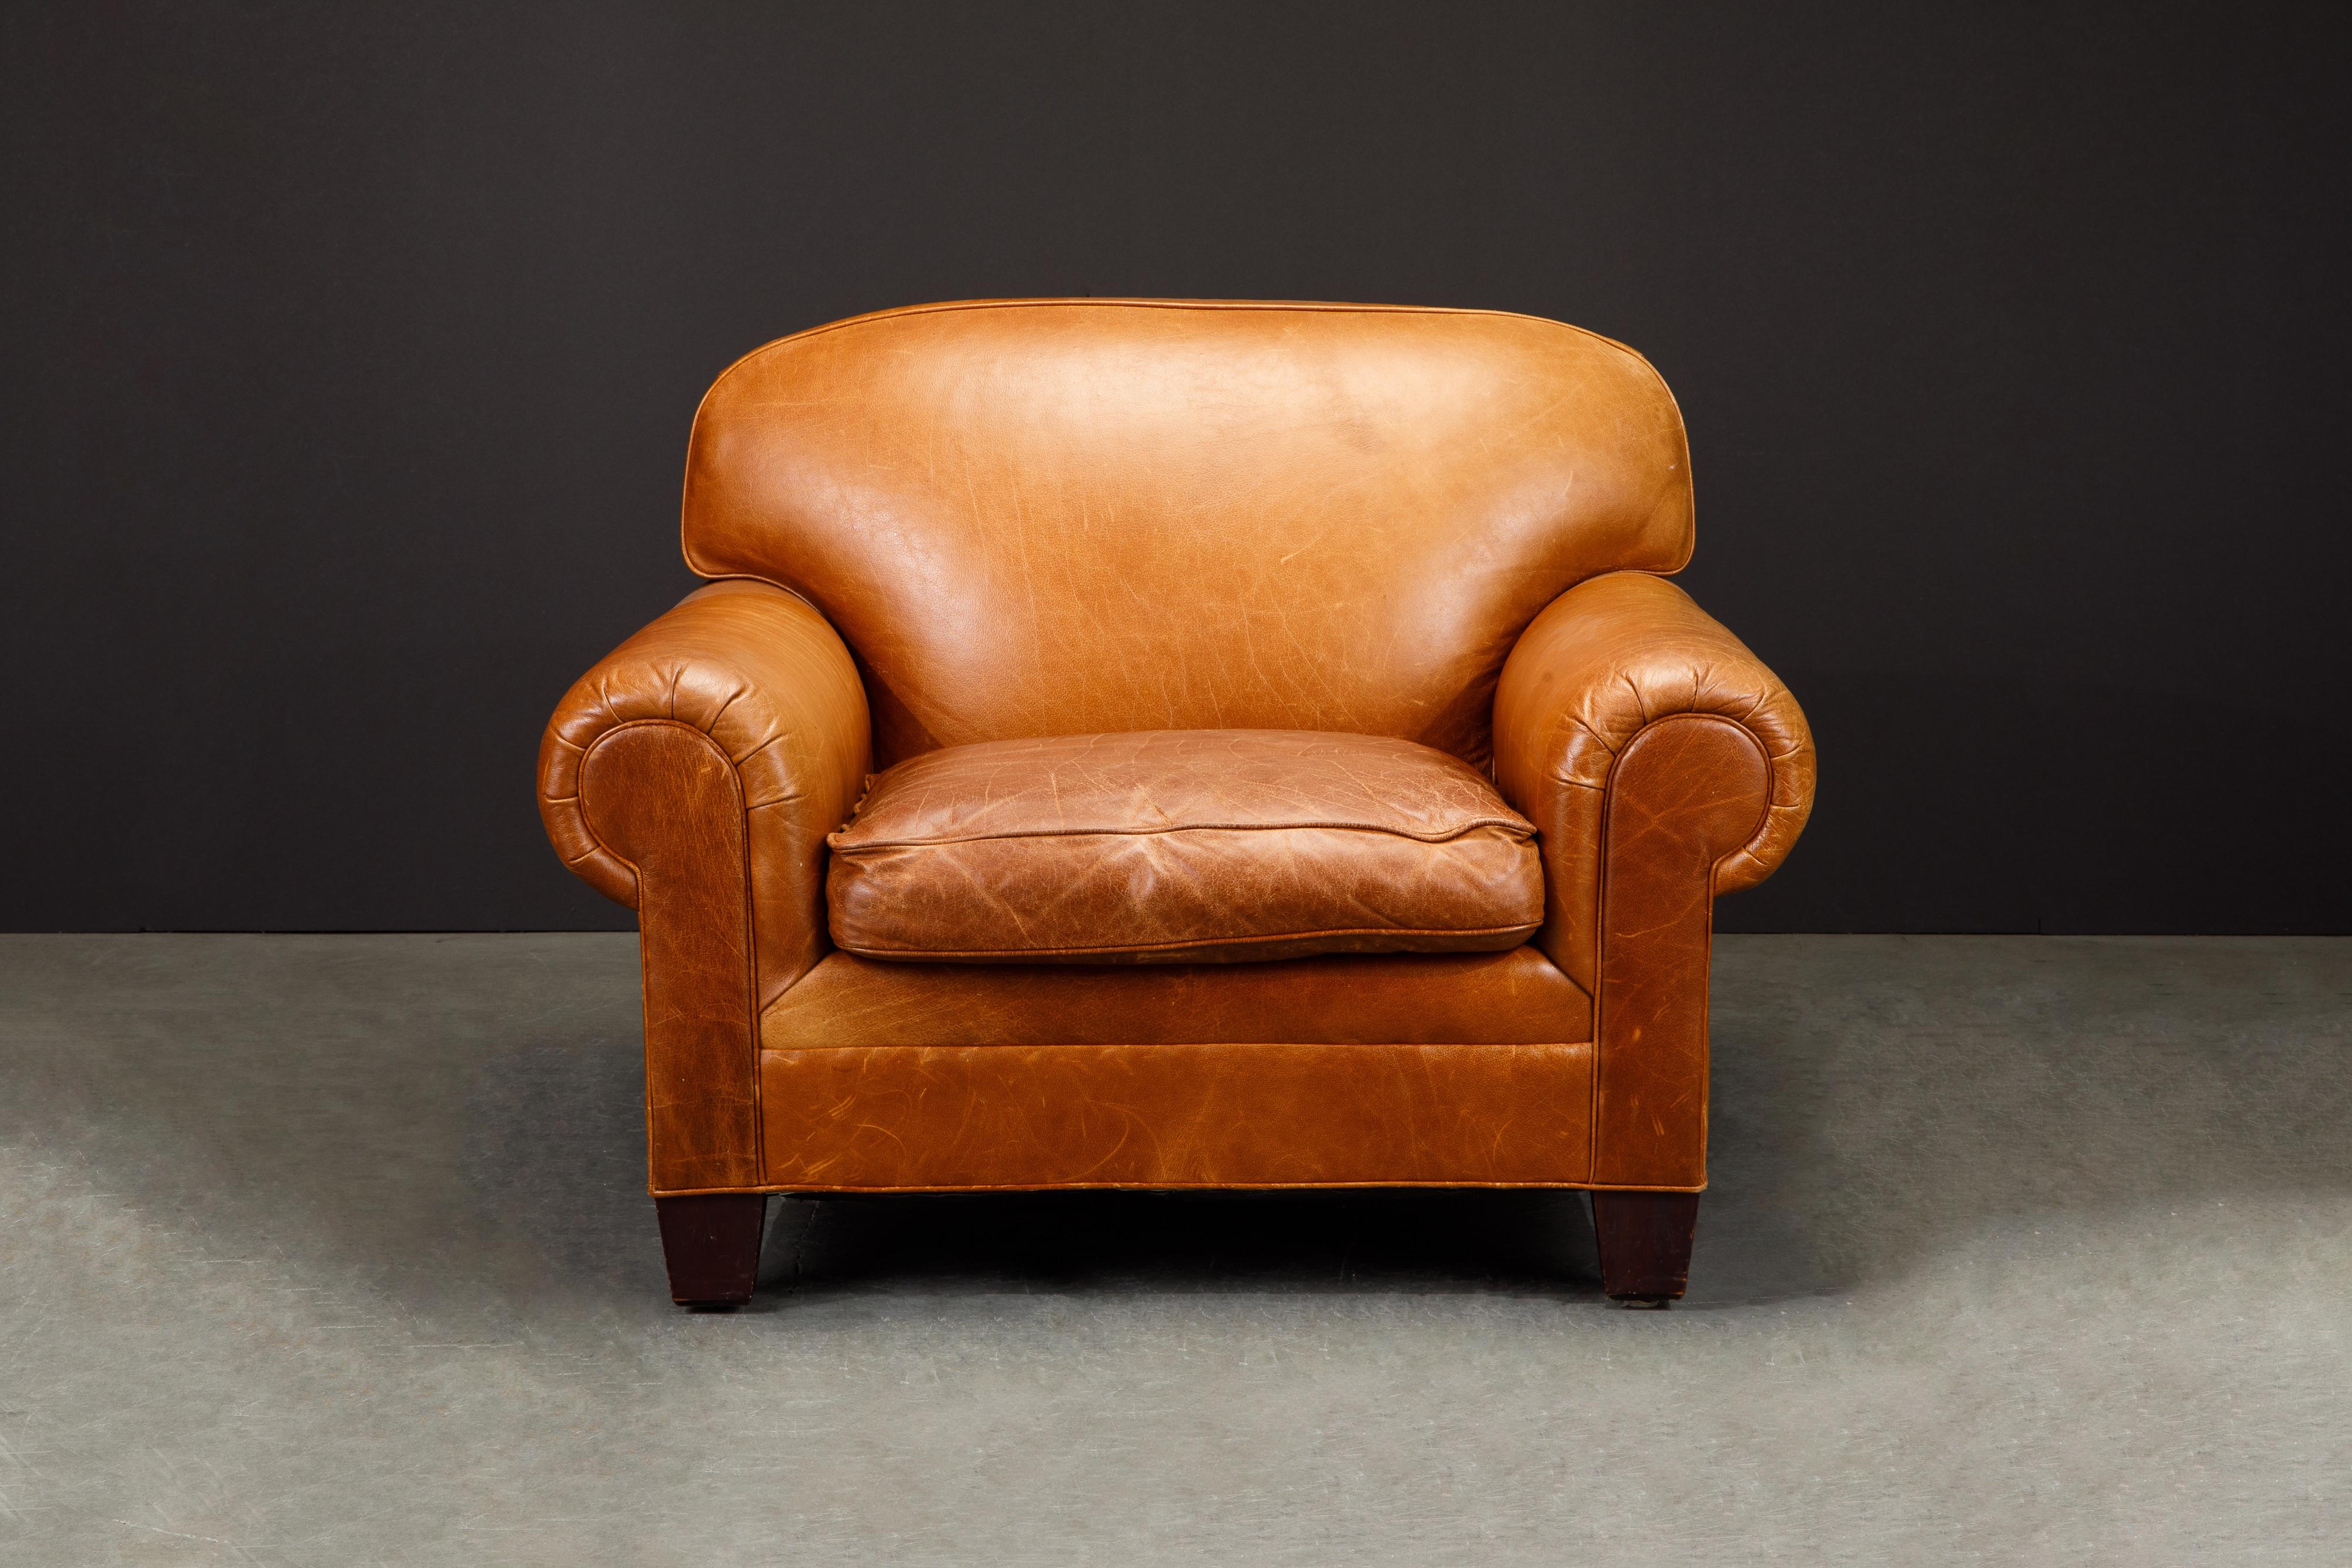 This gorgeous club chair and ottoman by Henredon for Ralph Lauren has such incredible lightly patinated leather, very thick and quality natural hides were used in it's making. 

This casual and laid-back yet refined club chair and ottoman is